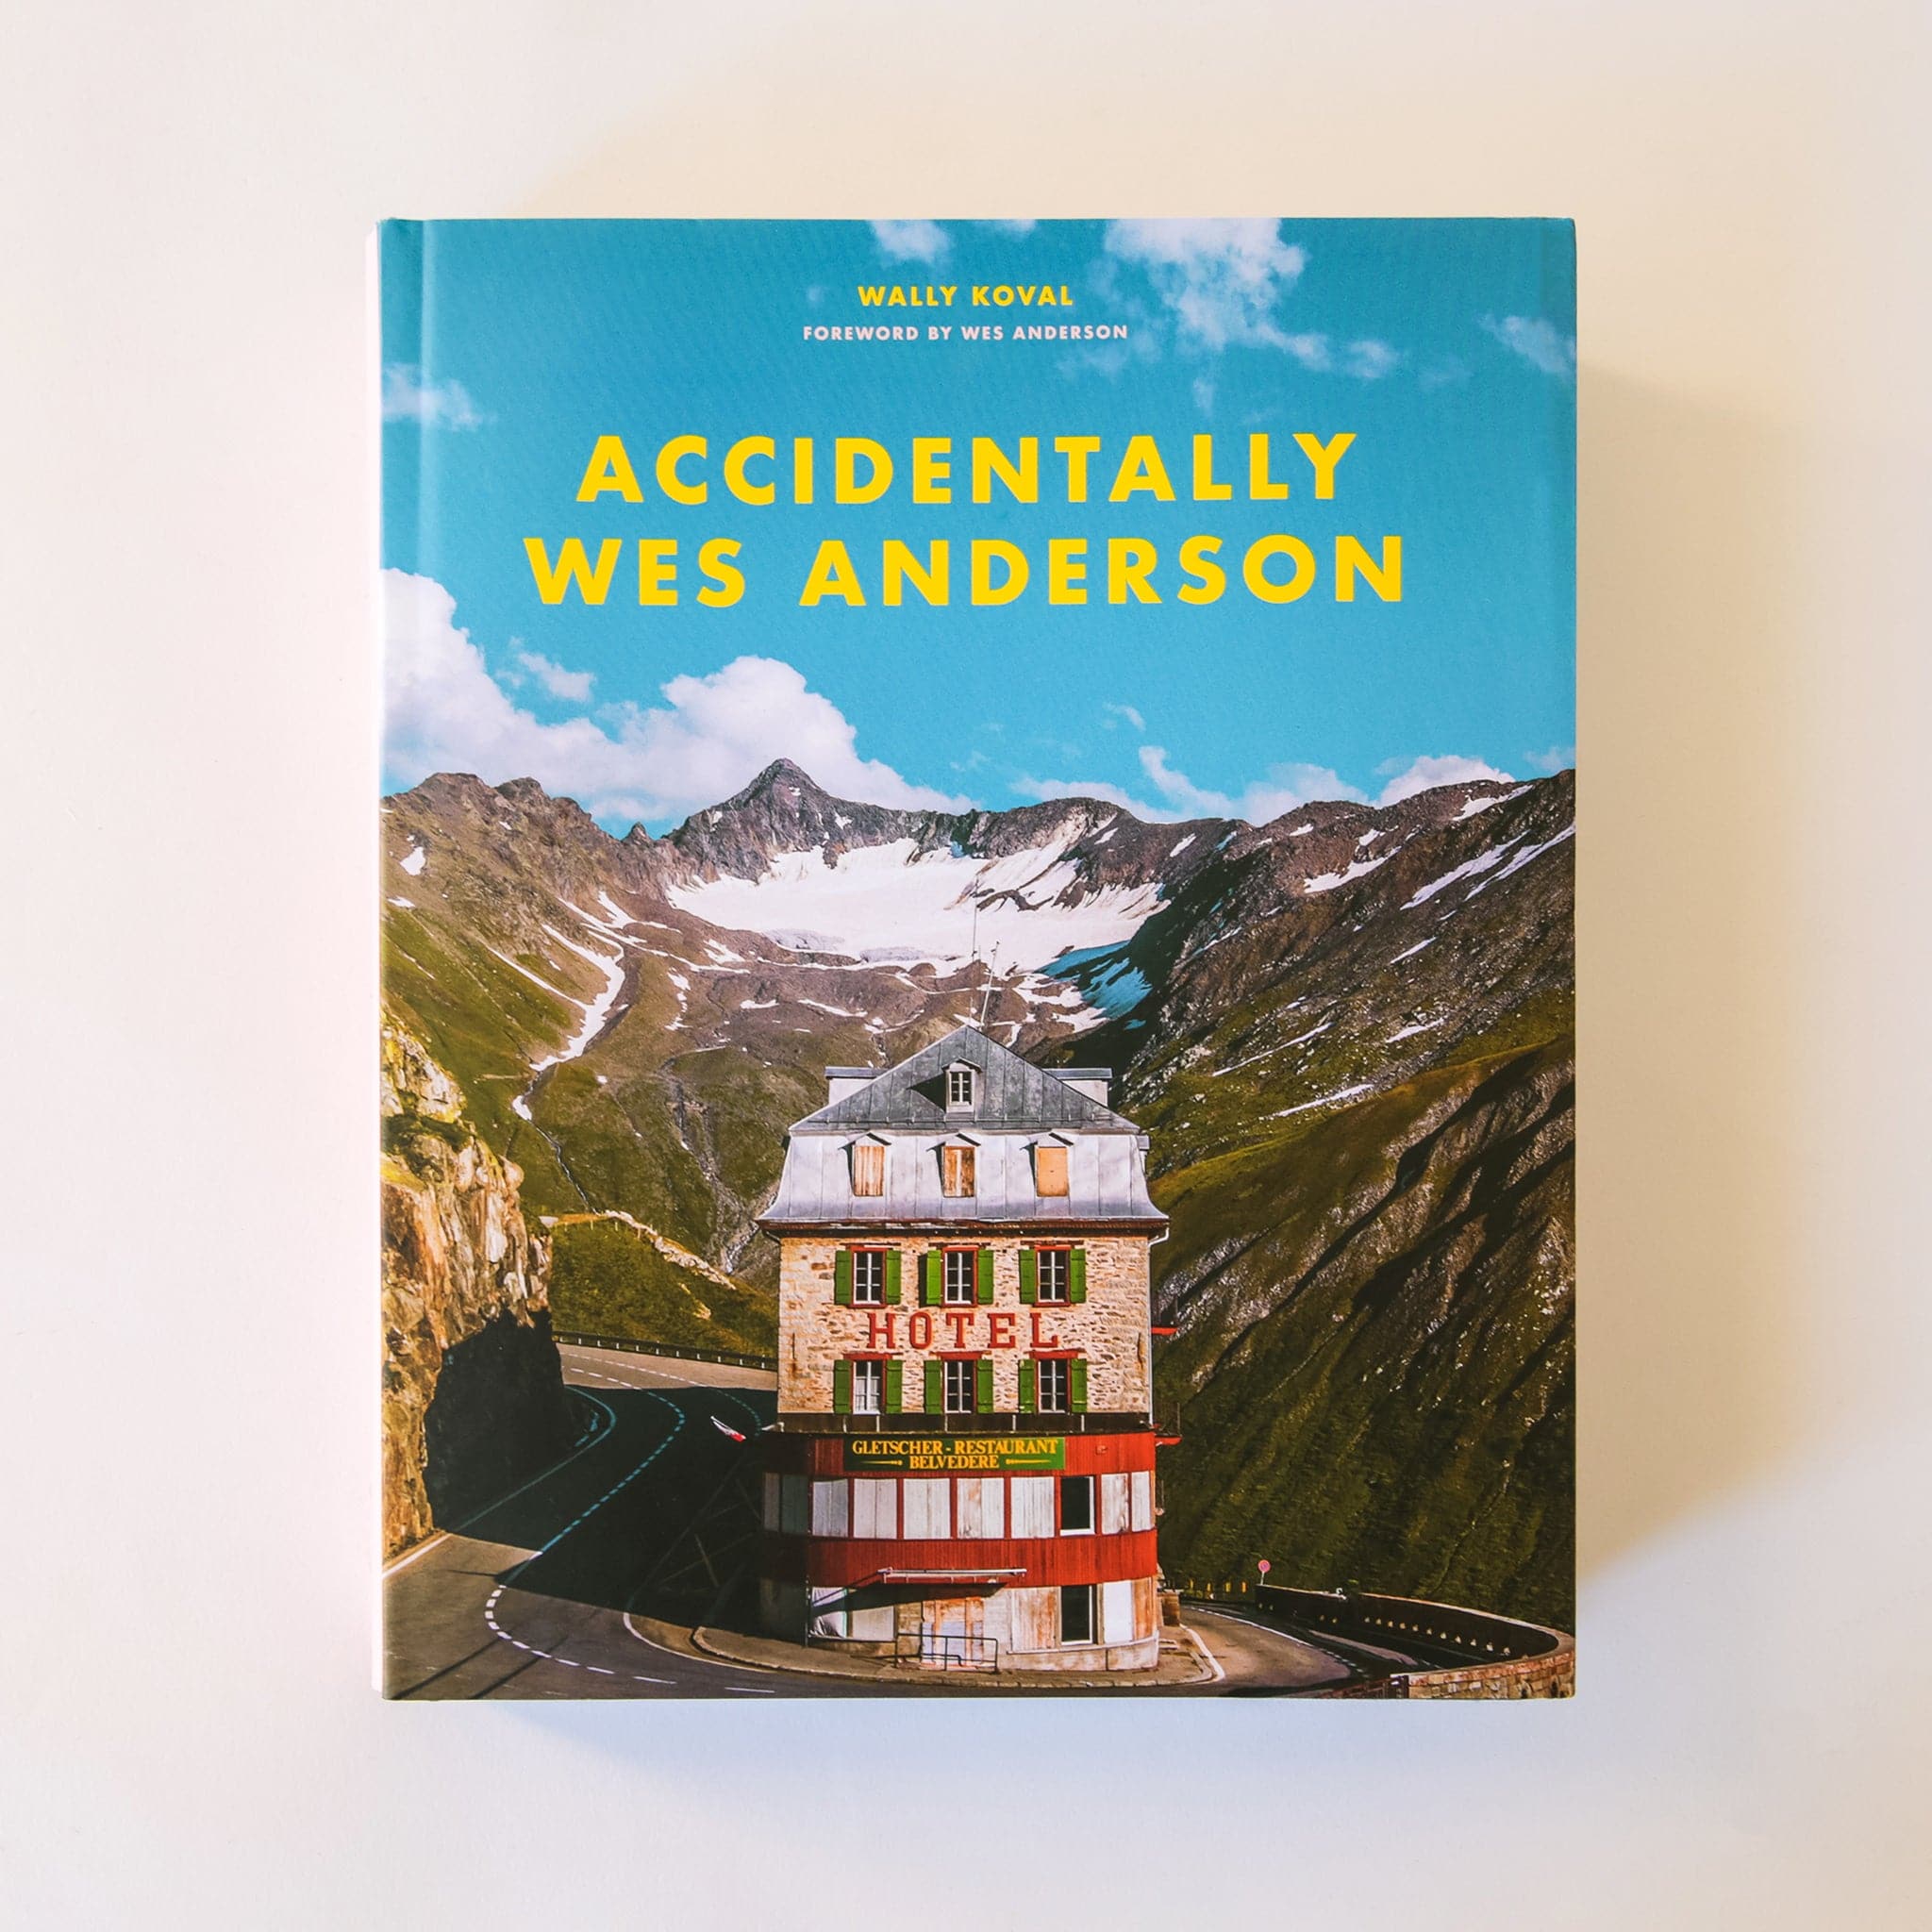 The cover of Accidentally Wes Anderson. It features an iconic scene with the Swiss Alps and a curving road around a brick hotel. It uses the color palette Wes Anderson is known for with the use of vivid warm, bright colors.